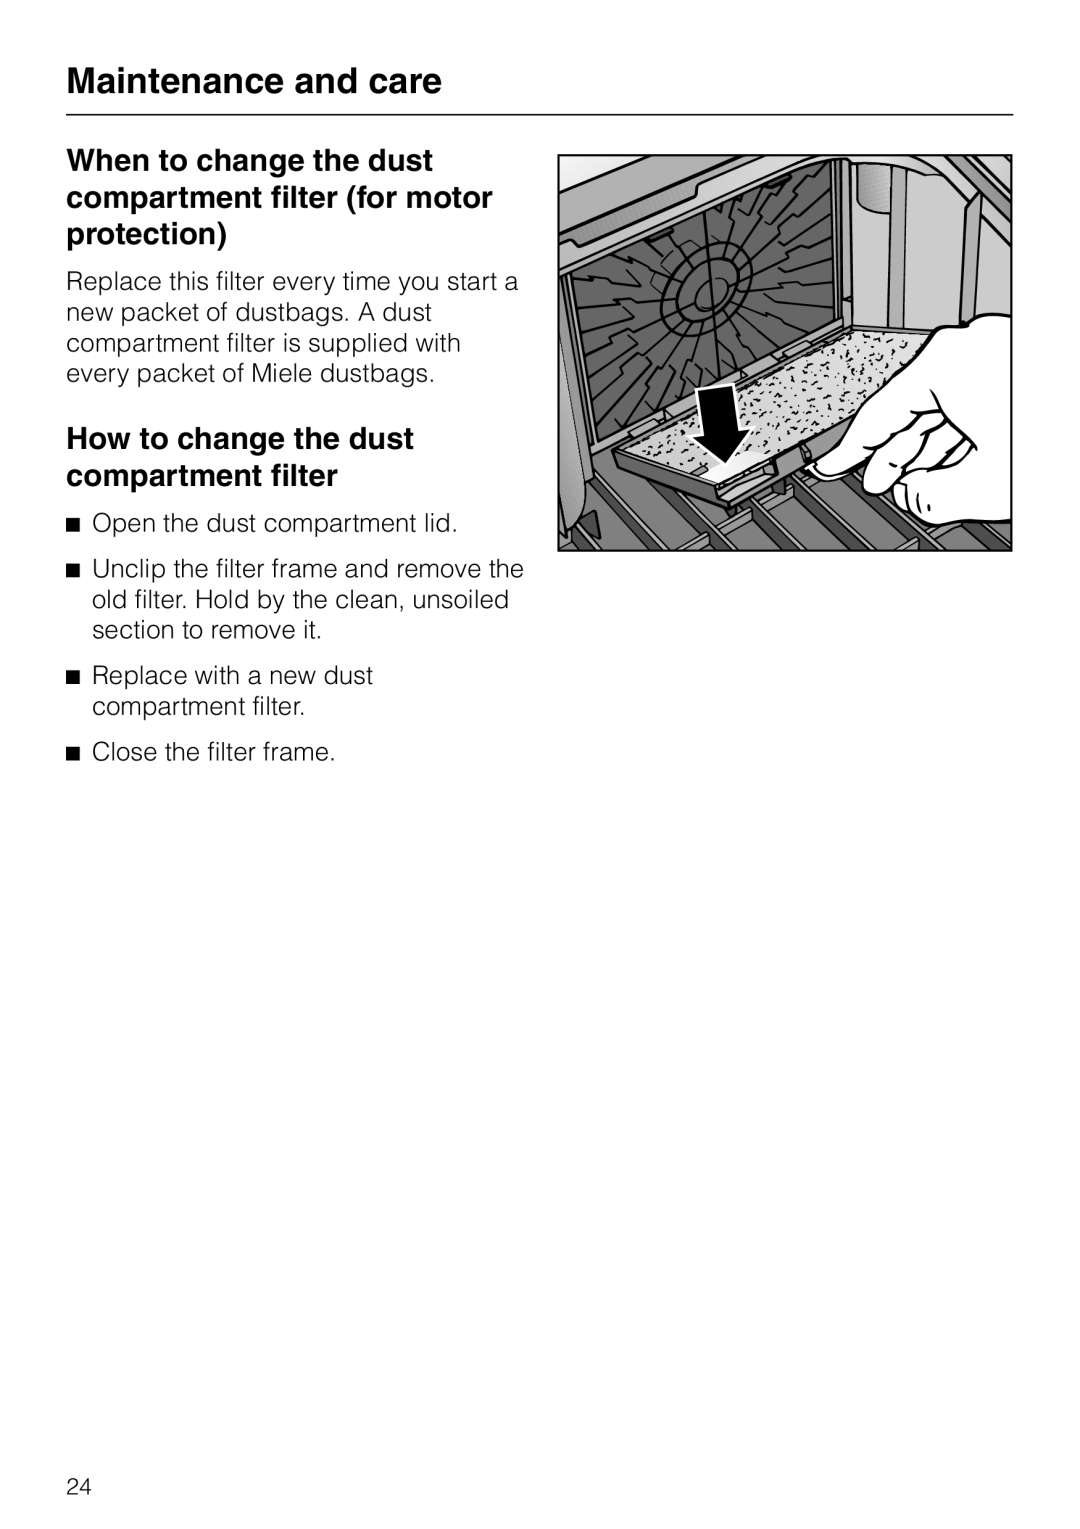 Miele S 5980 manual How to change the dust compartment filter, Maintenance and care 